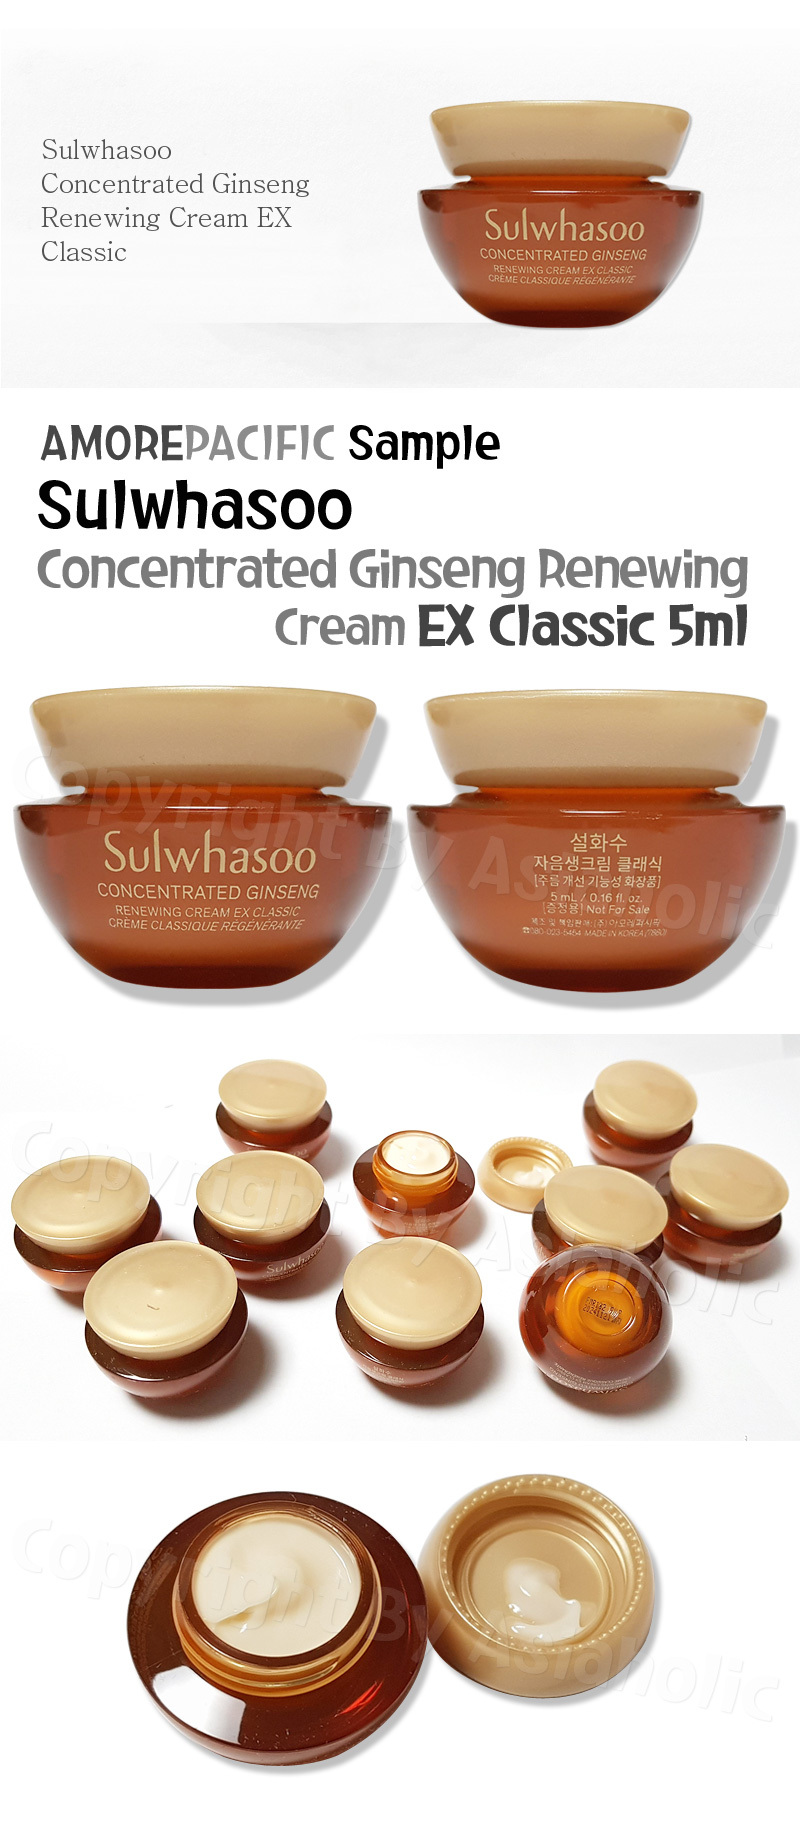 Sulwhasoo Concentrated Ginseng Renewing Cream EX Classic 5ml x 4pcs (20ml) Newest Version